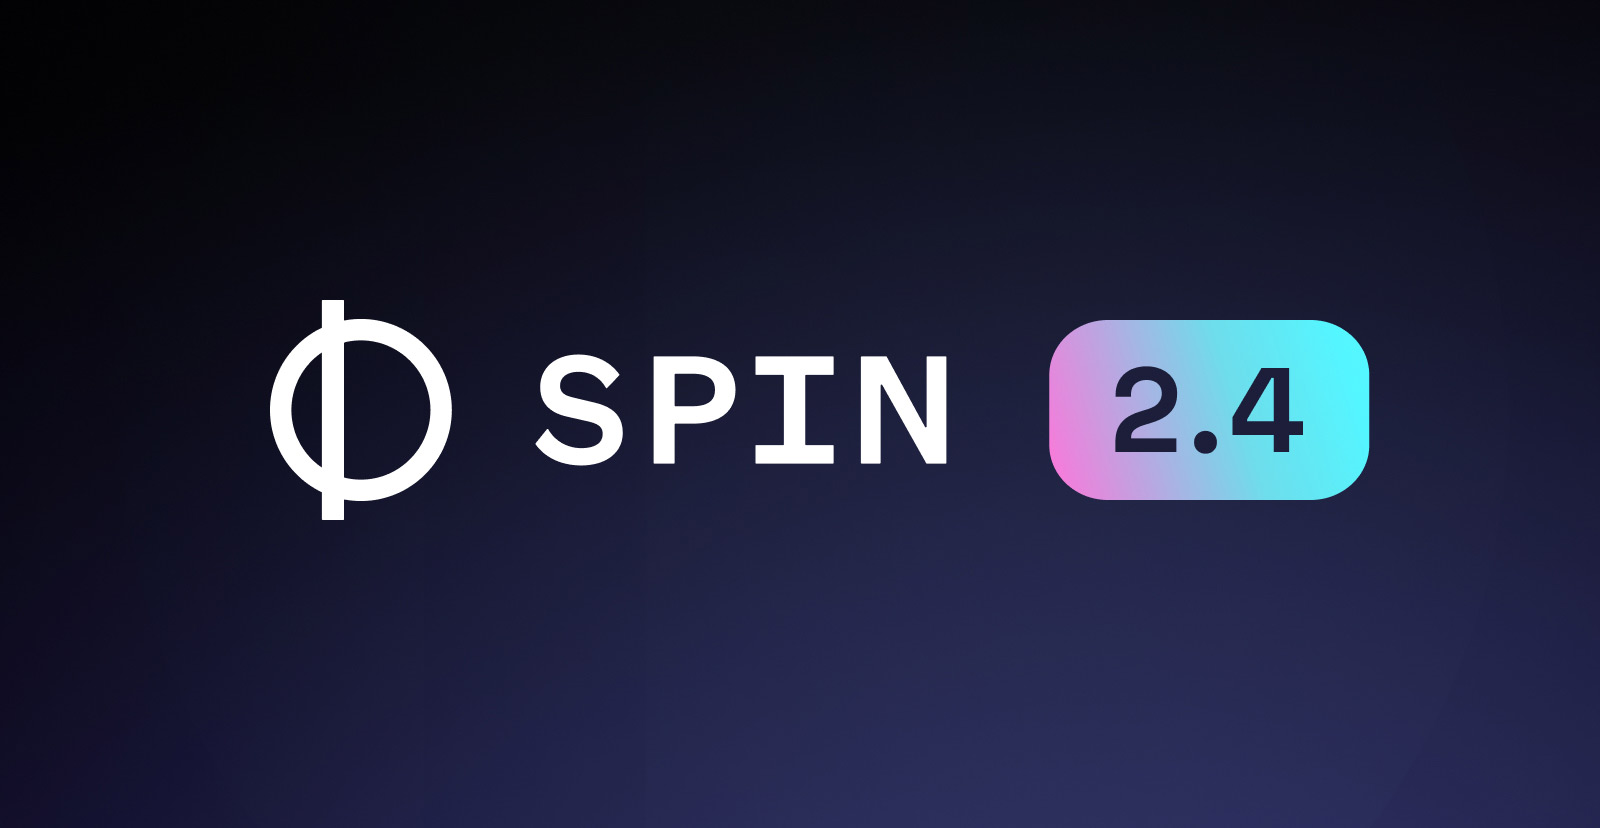 Announcing Spin 2.4